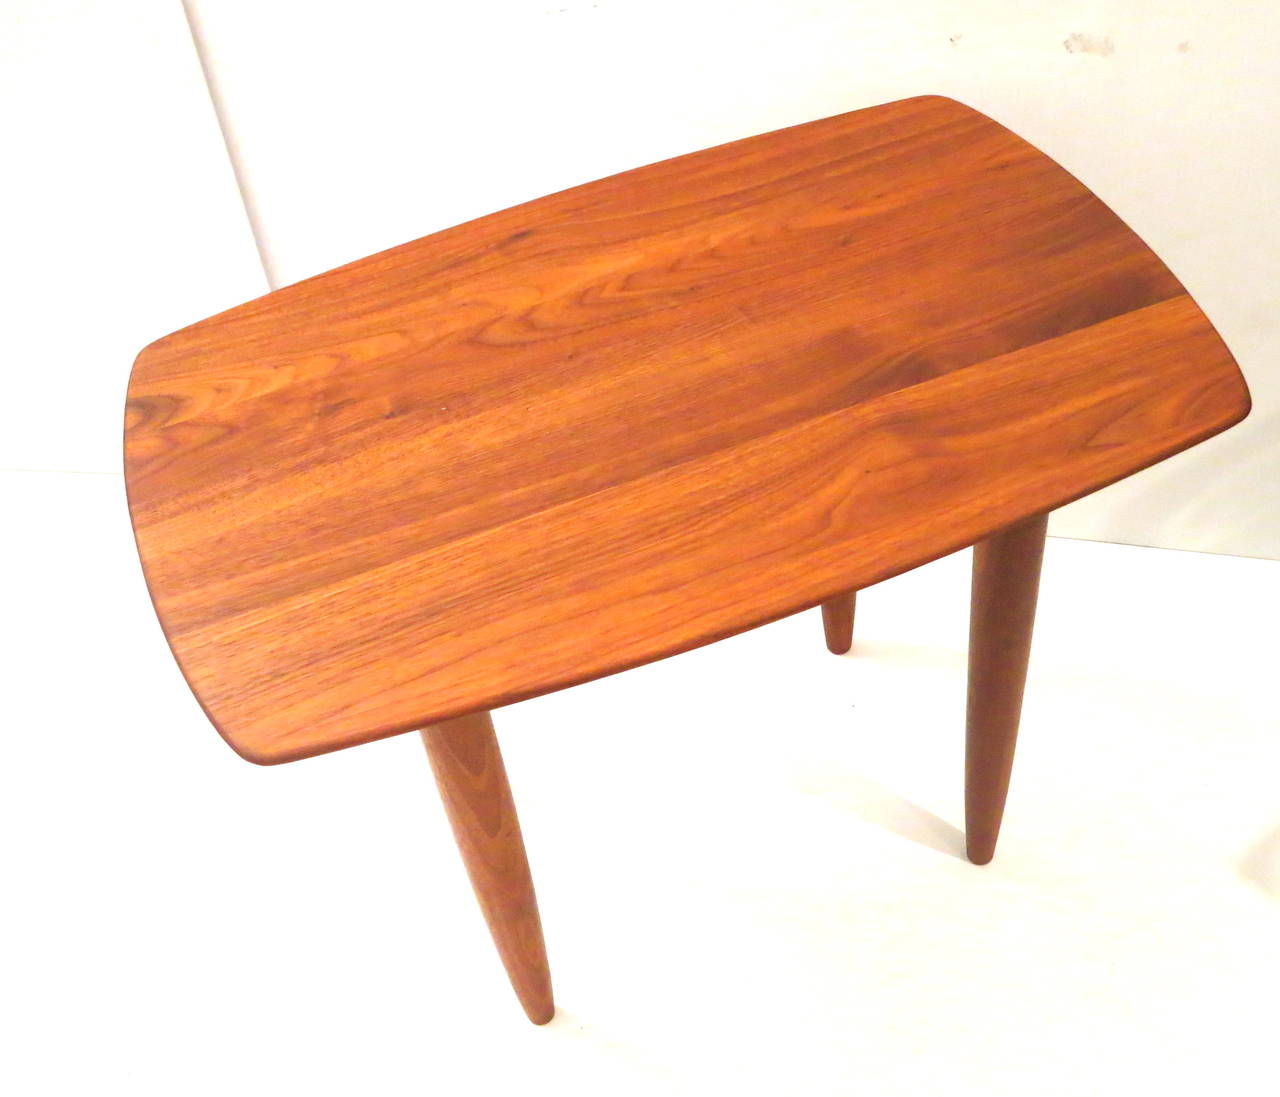 20th Century American Modern pair of solid walnut end tables by Ace-Hi of California